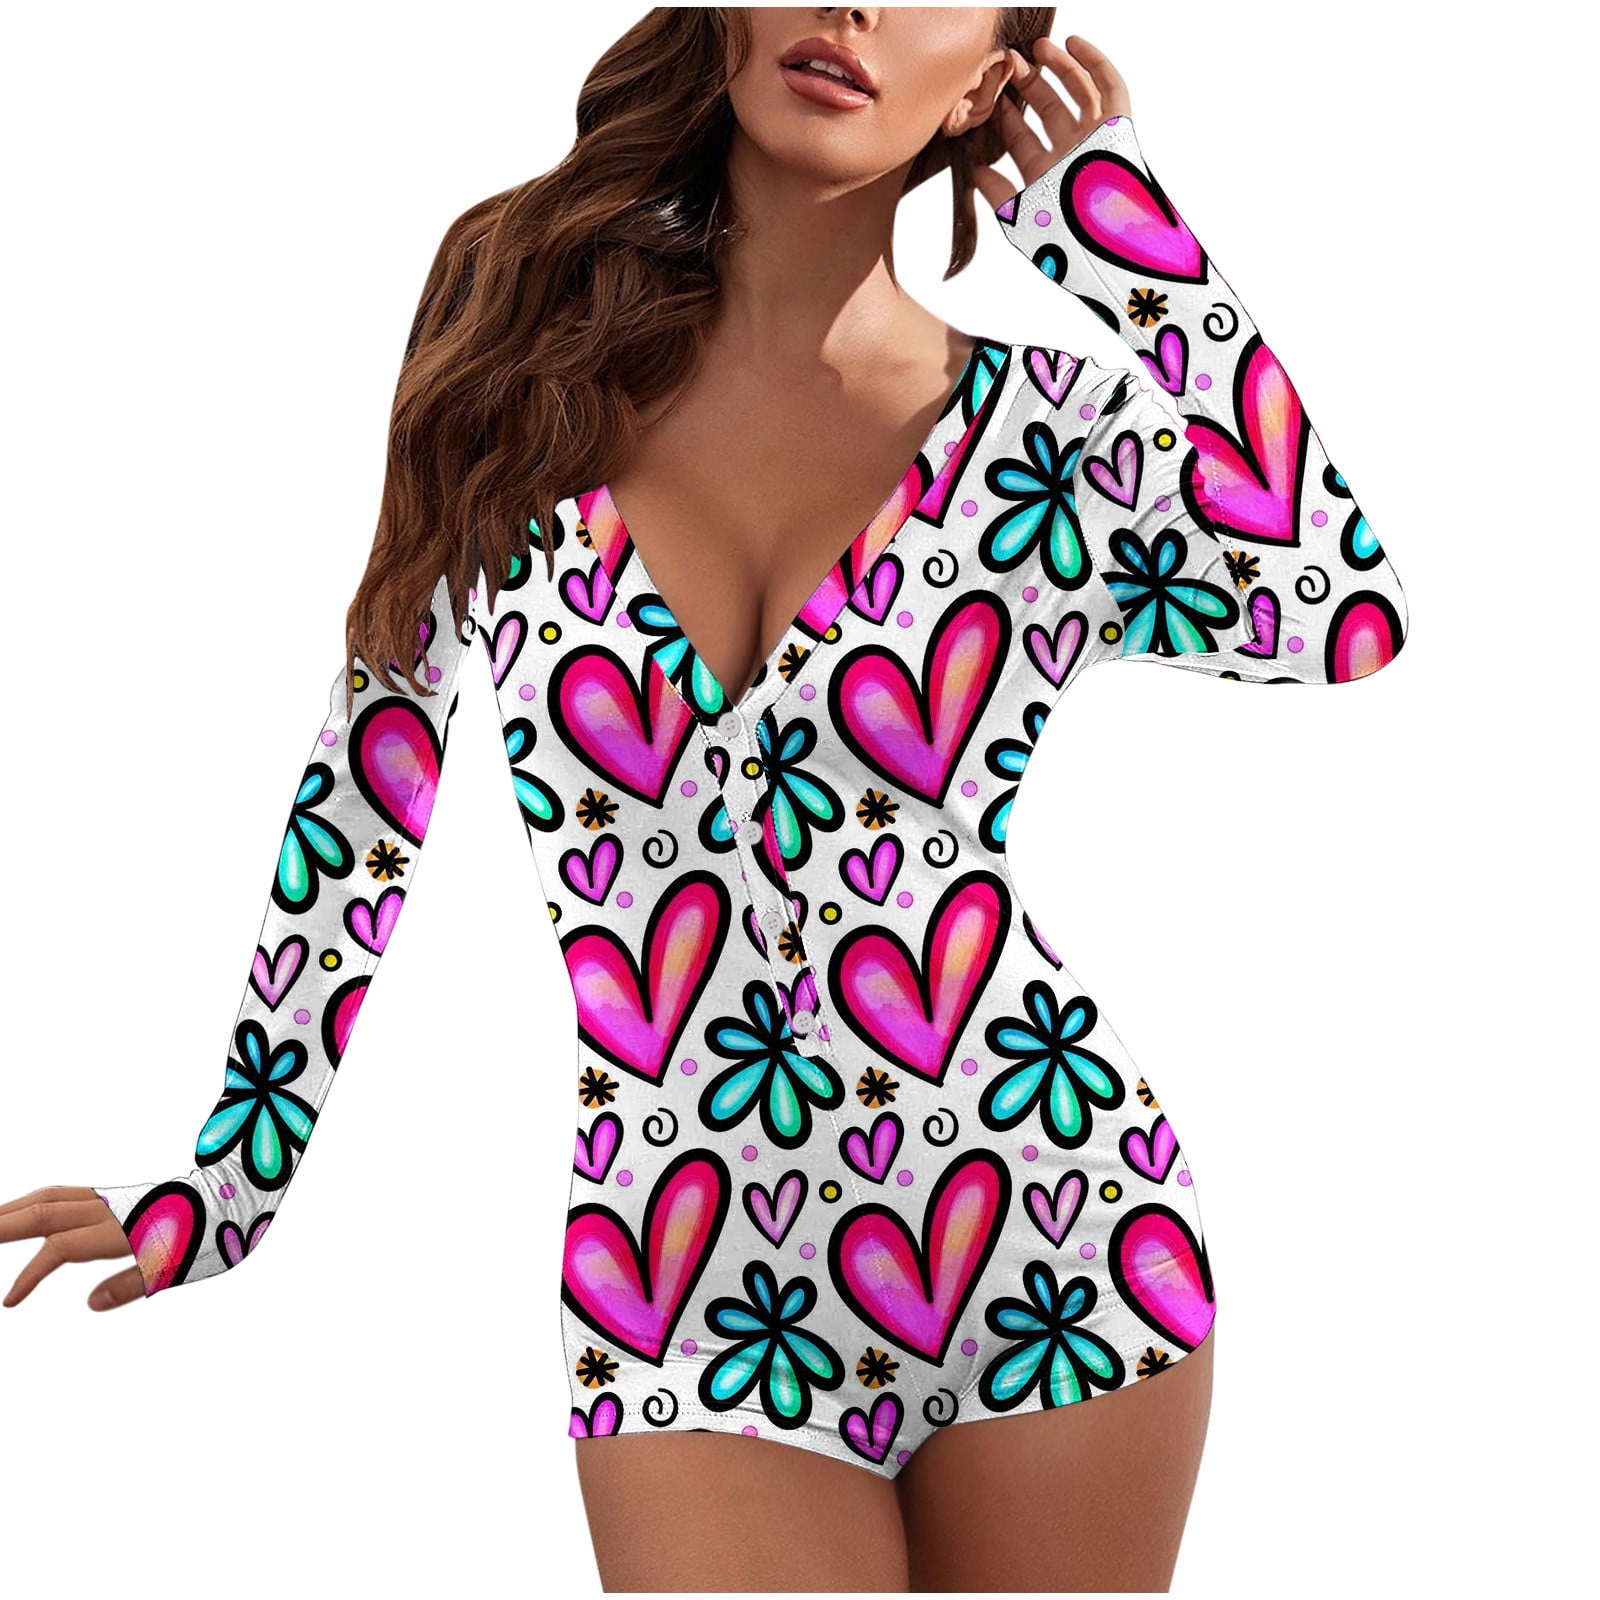 VALMASS Bodysuits for Women Shorts Plus Size Deep V Neck Printed Sexy  Rompers Tight Curvy Pajama Onesie (S, G Pink) 